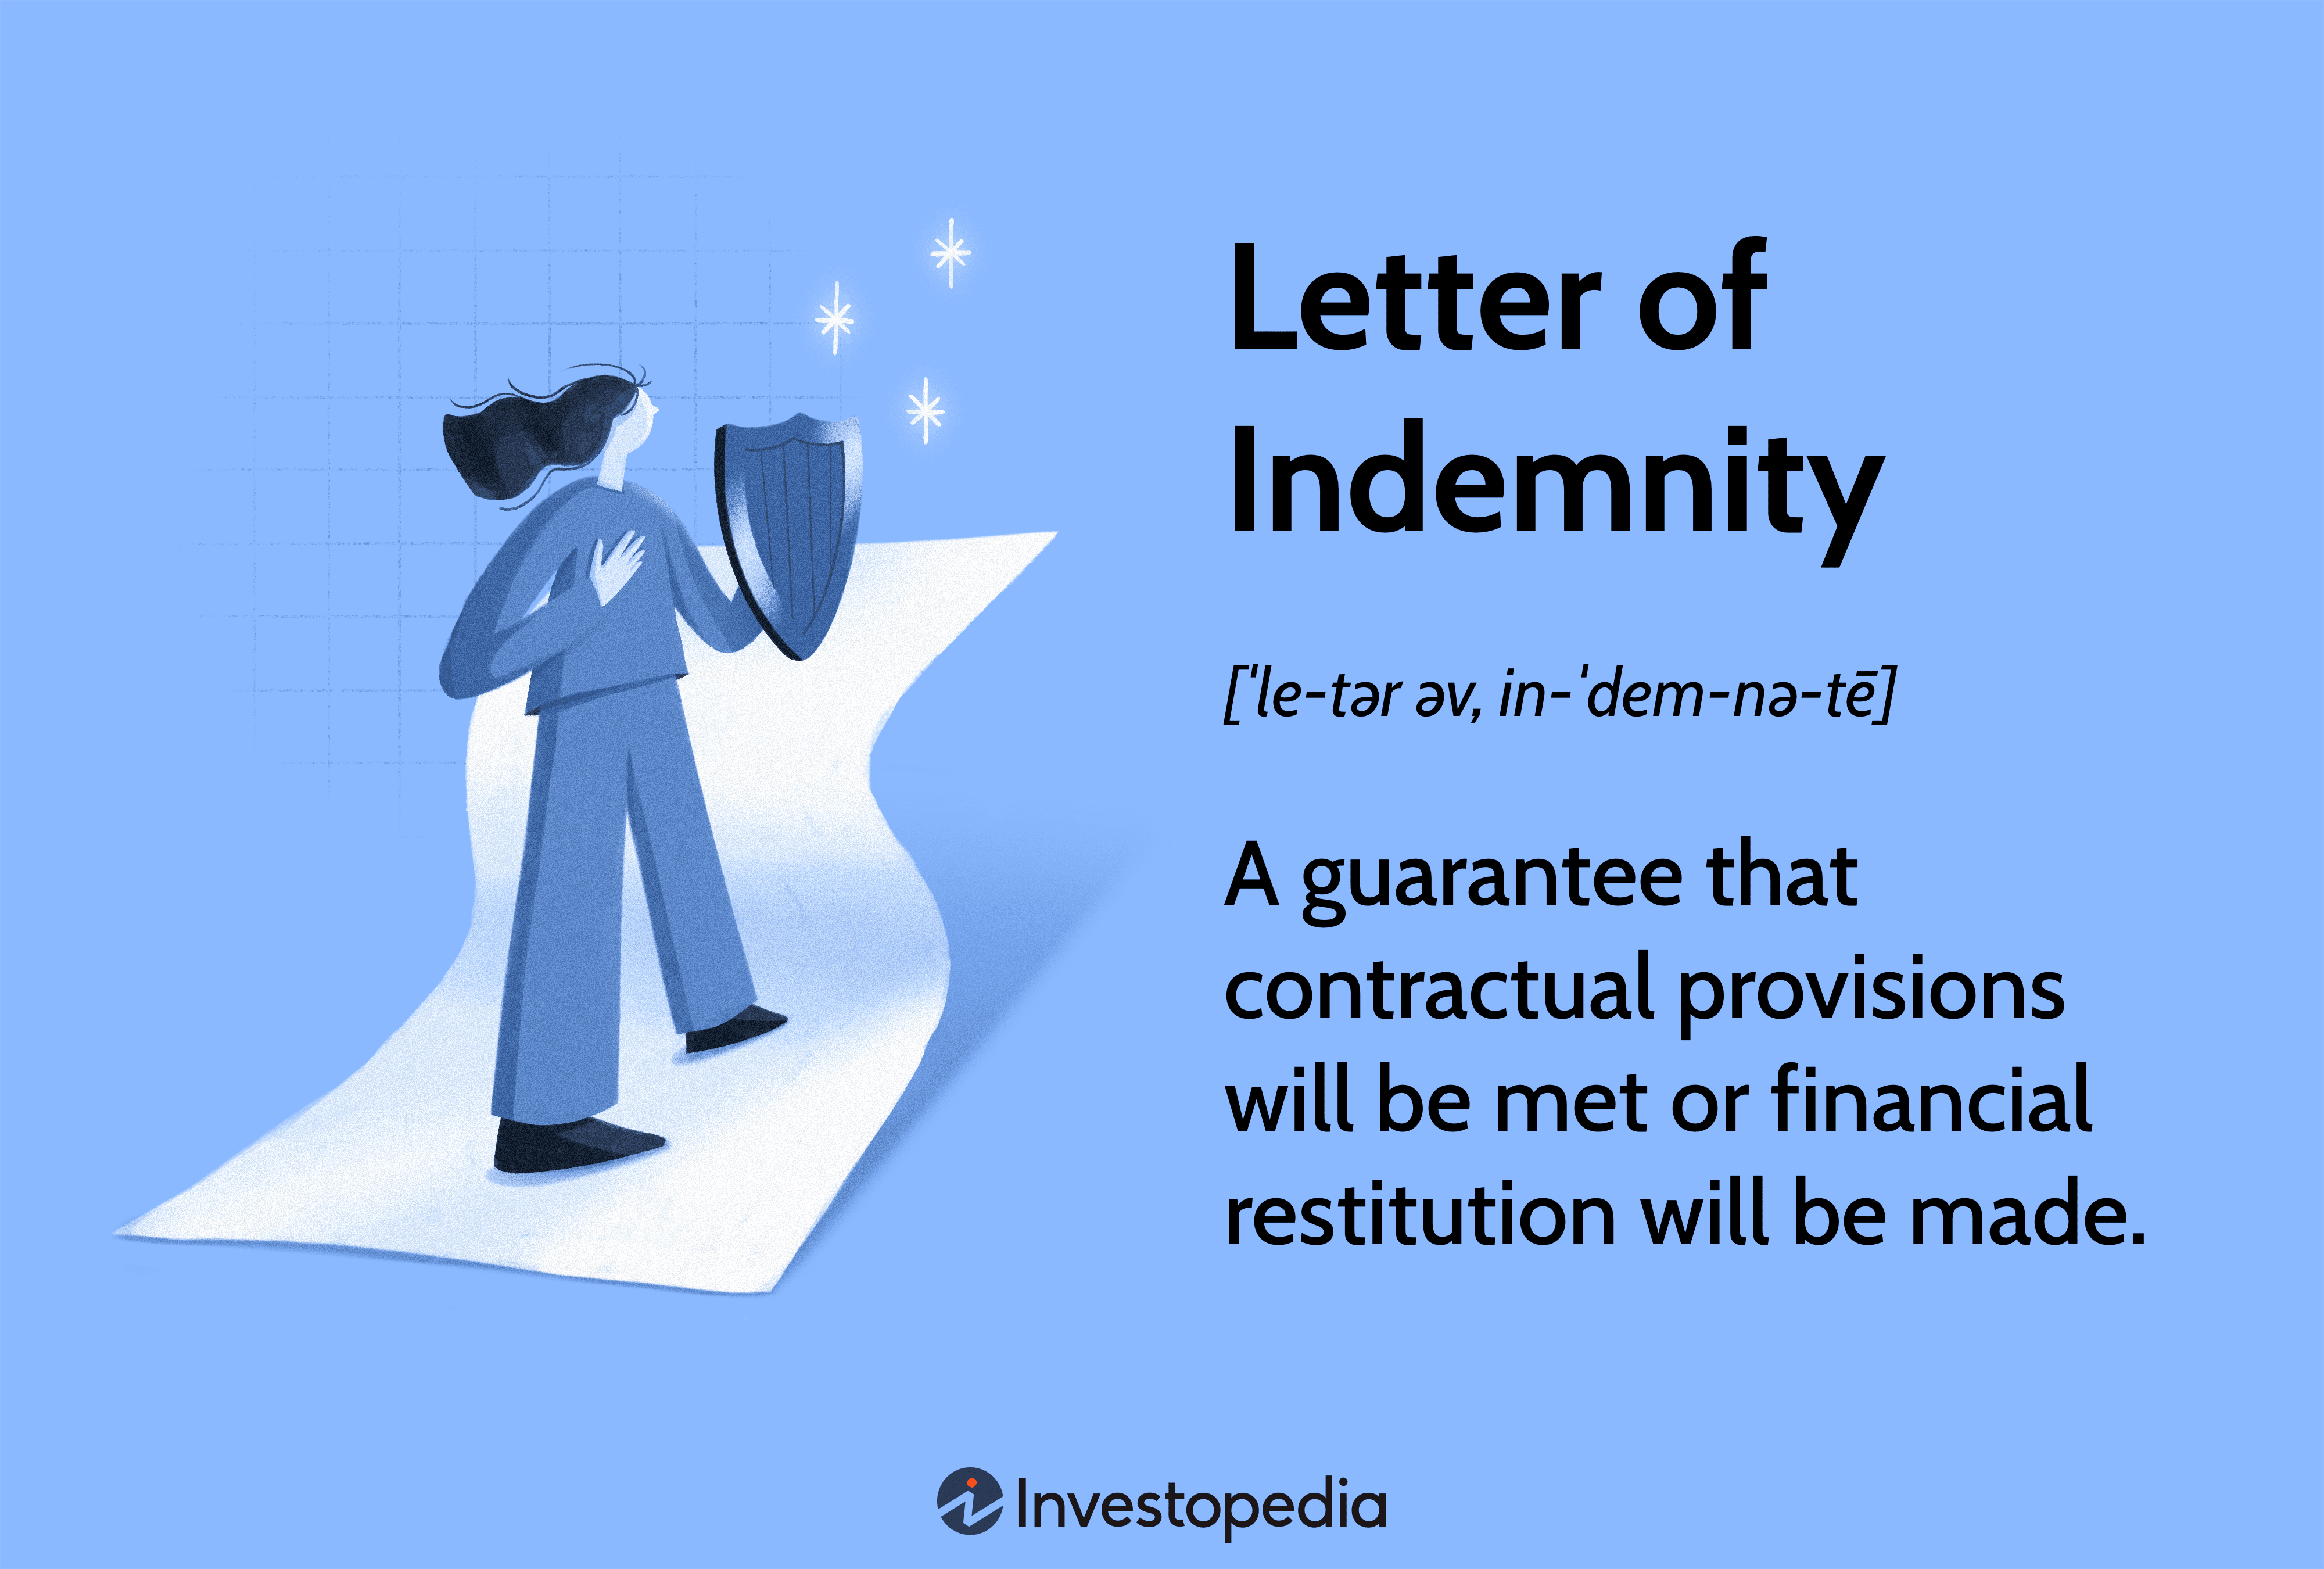 Letter of Indemnity (LOI): A guarantee that contractual provisions will be met or financial restitution will be made.